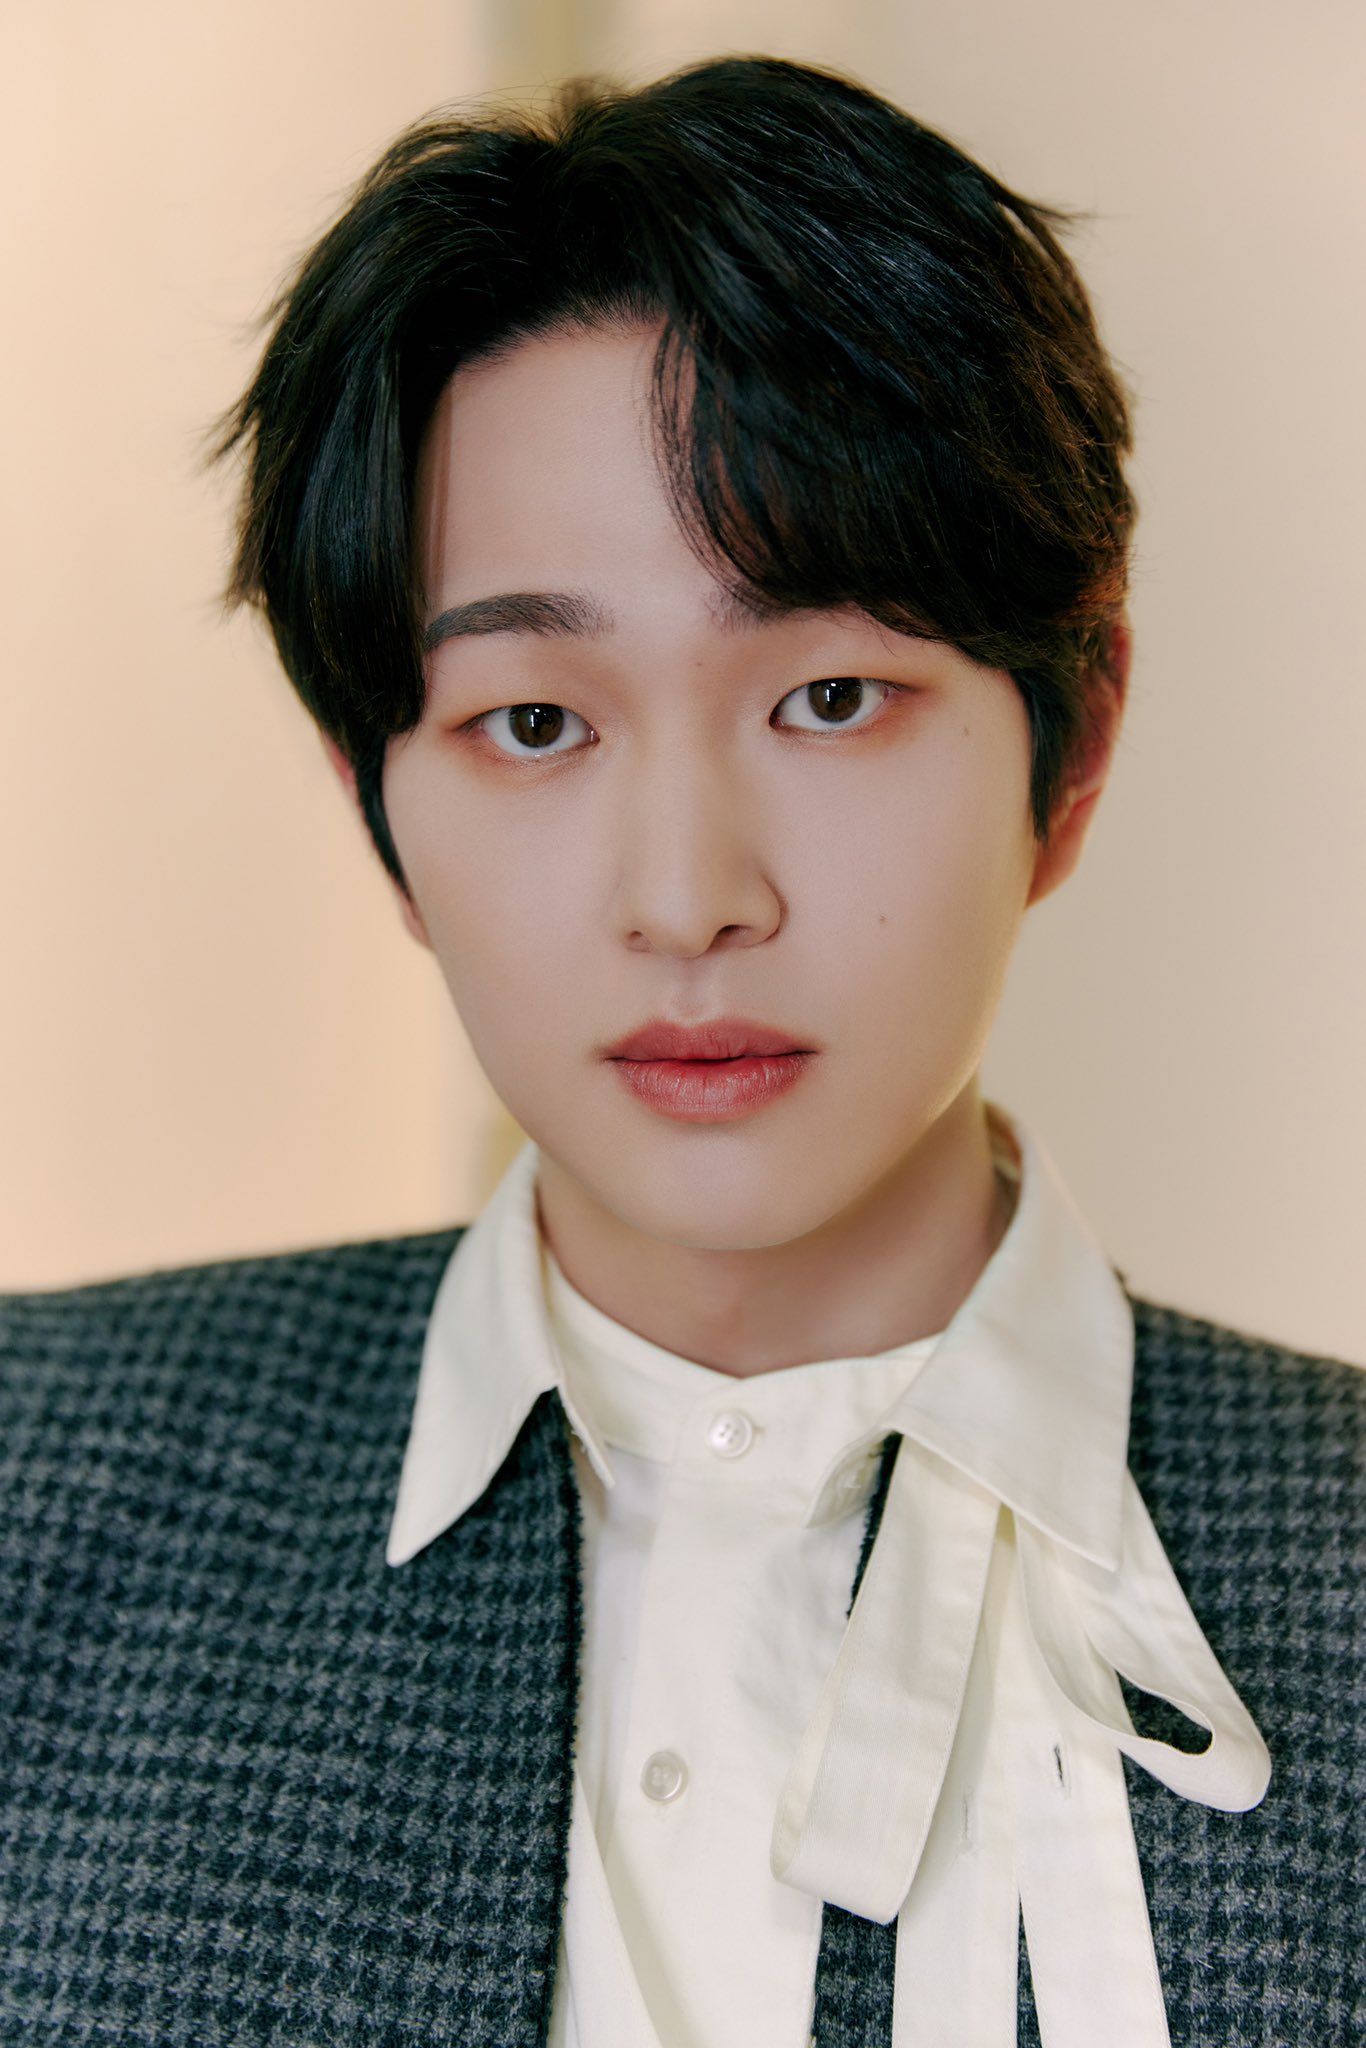 [SMSTATION] ONEW x Punch 'Way' teaser